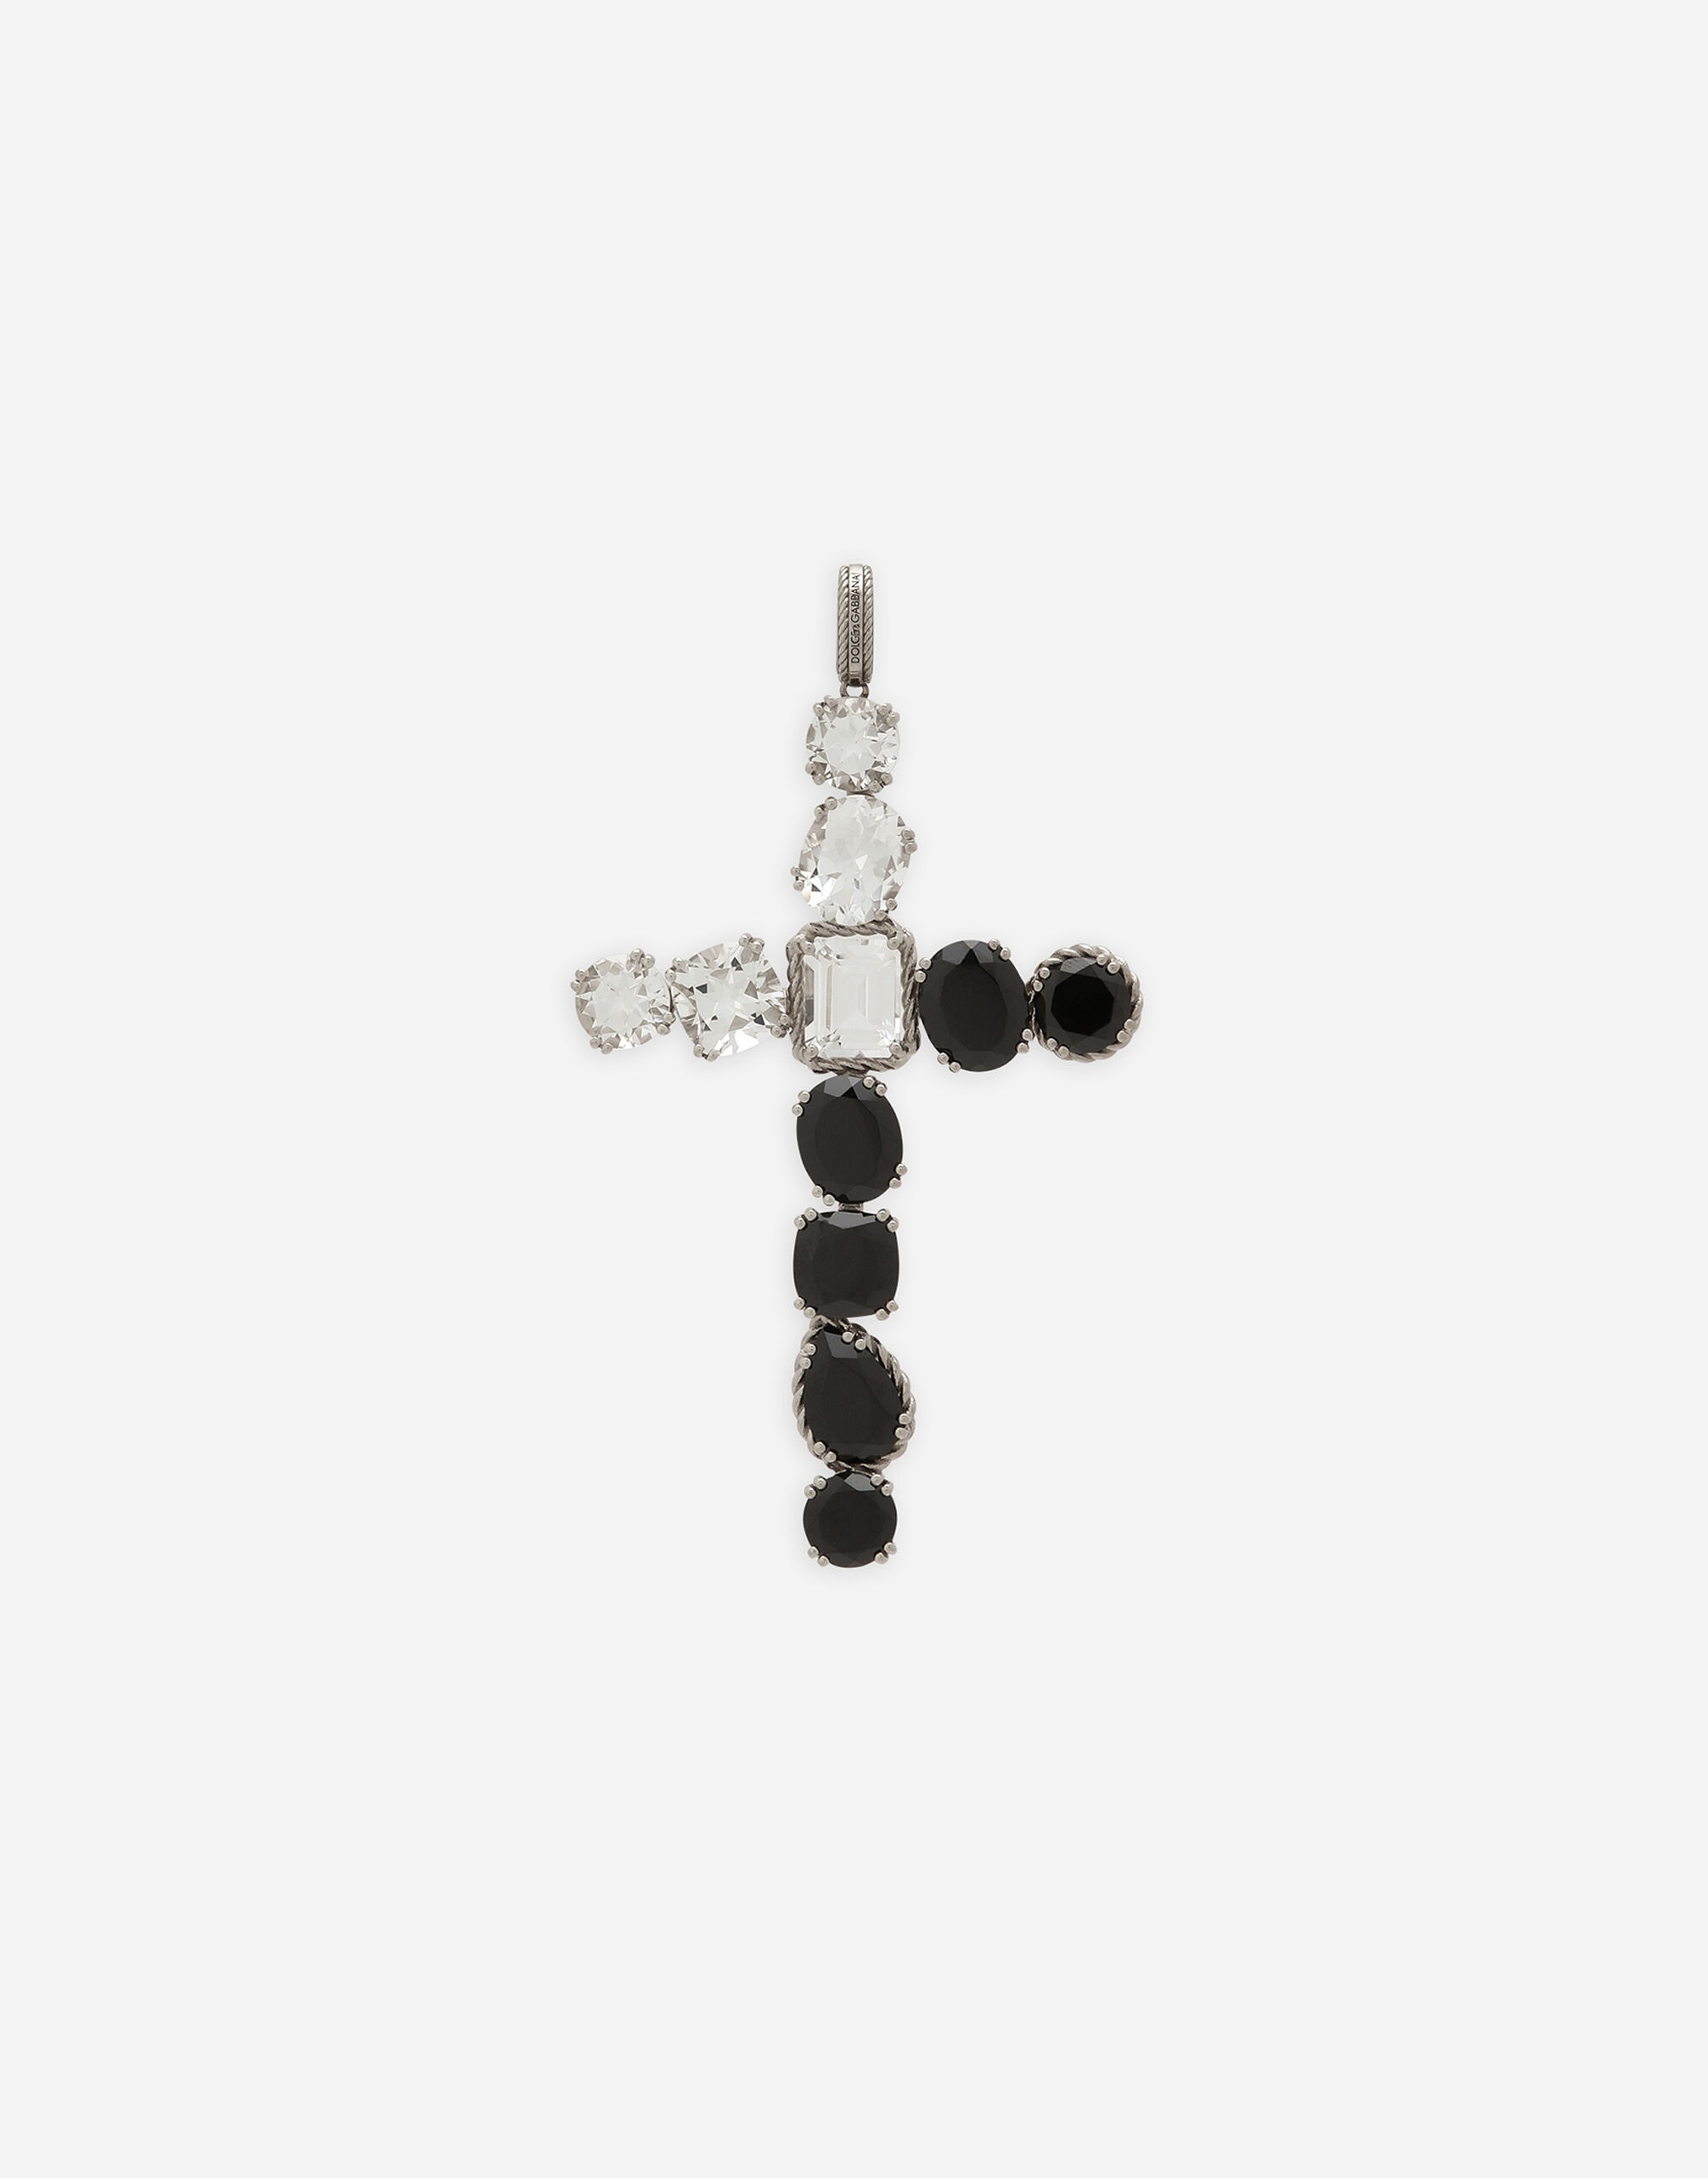 18k white gold Anna charm with colorless topazes and black spinels - 1